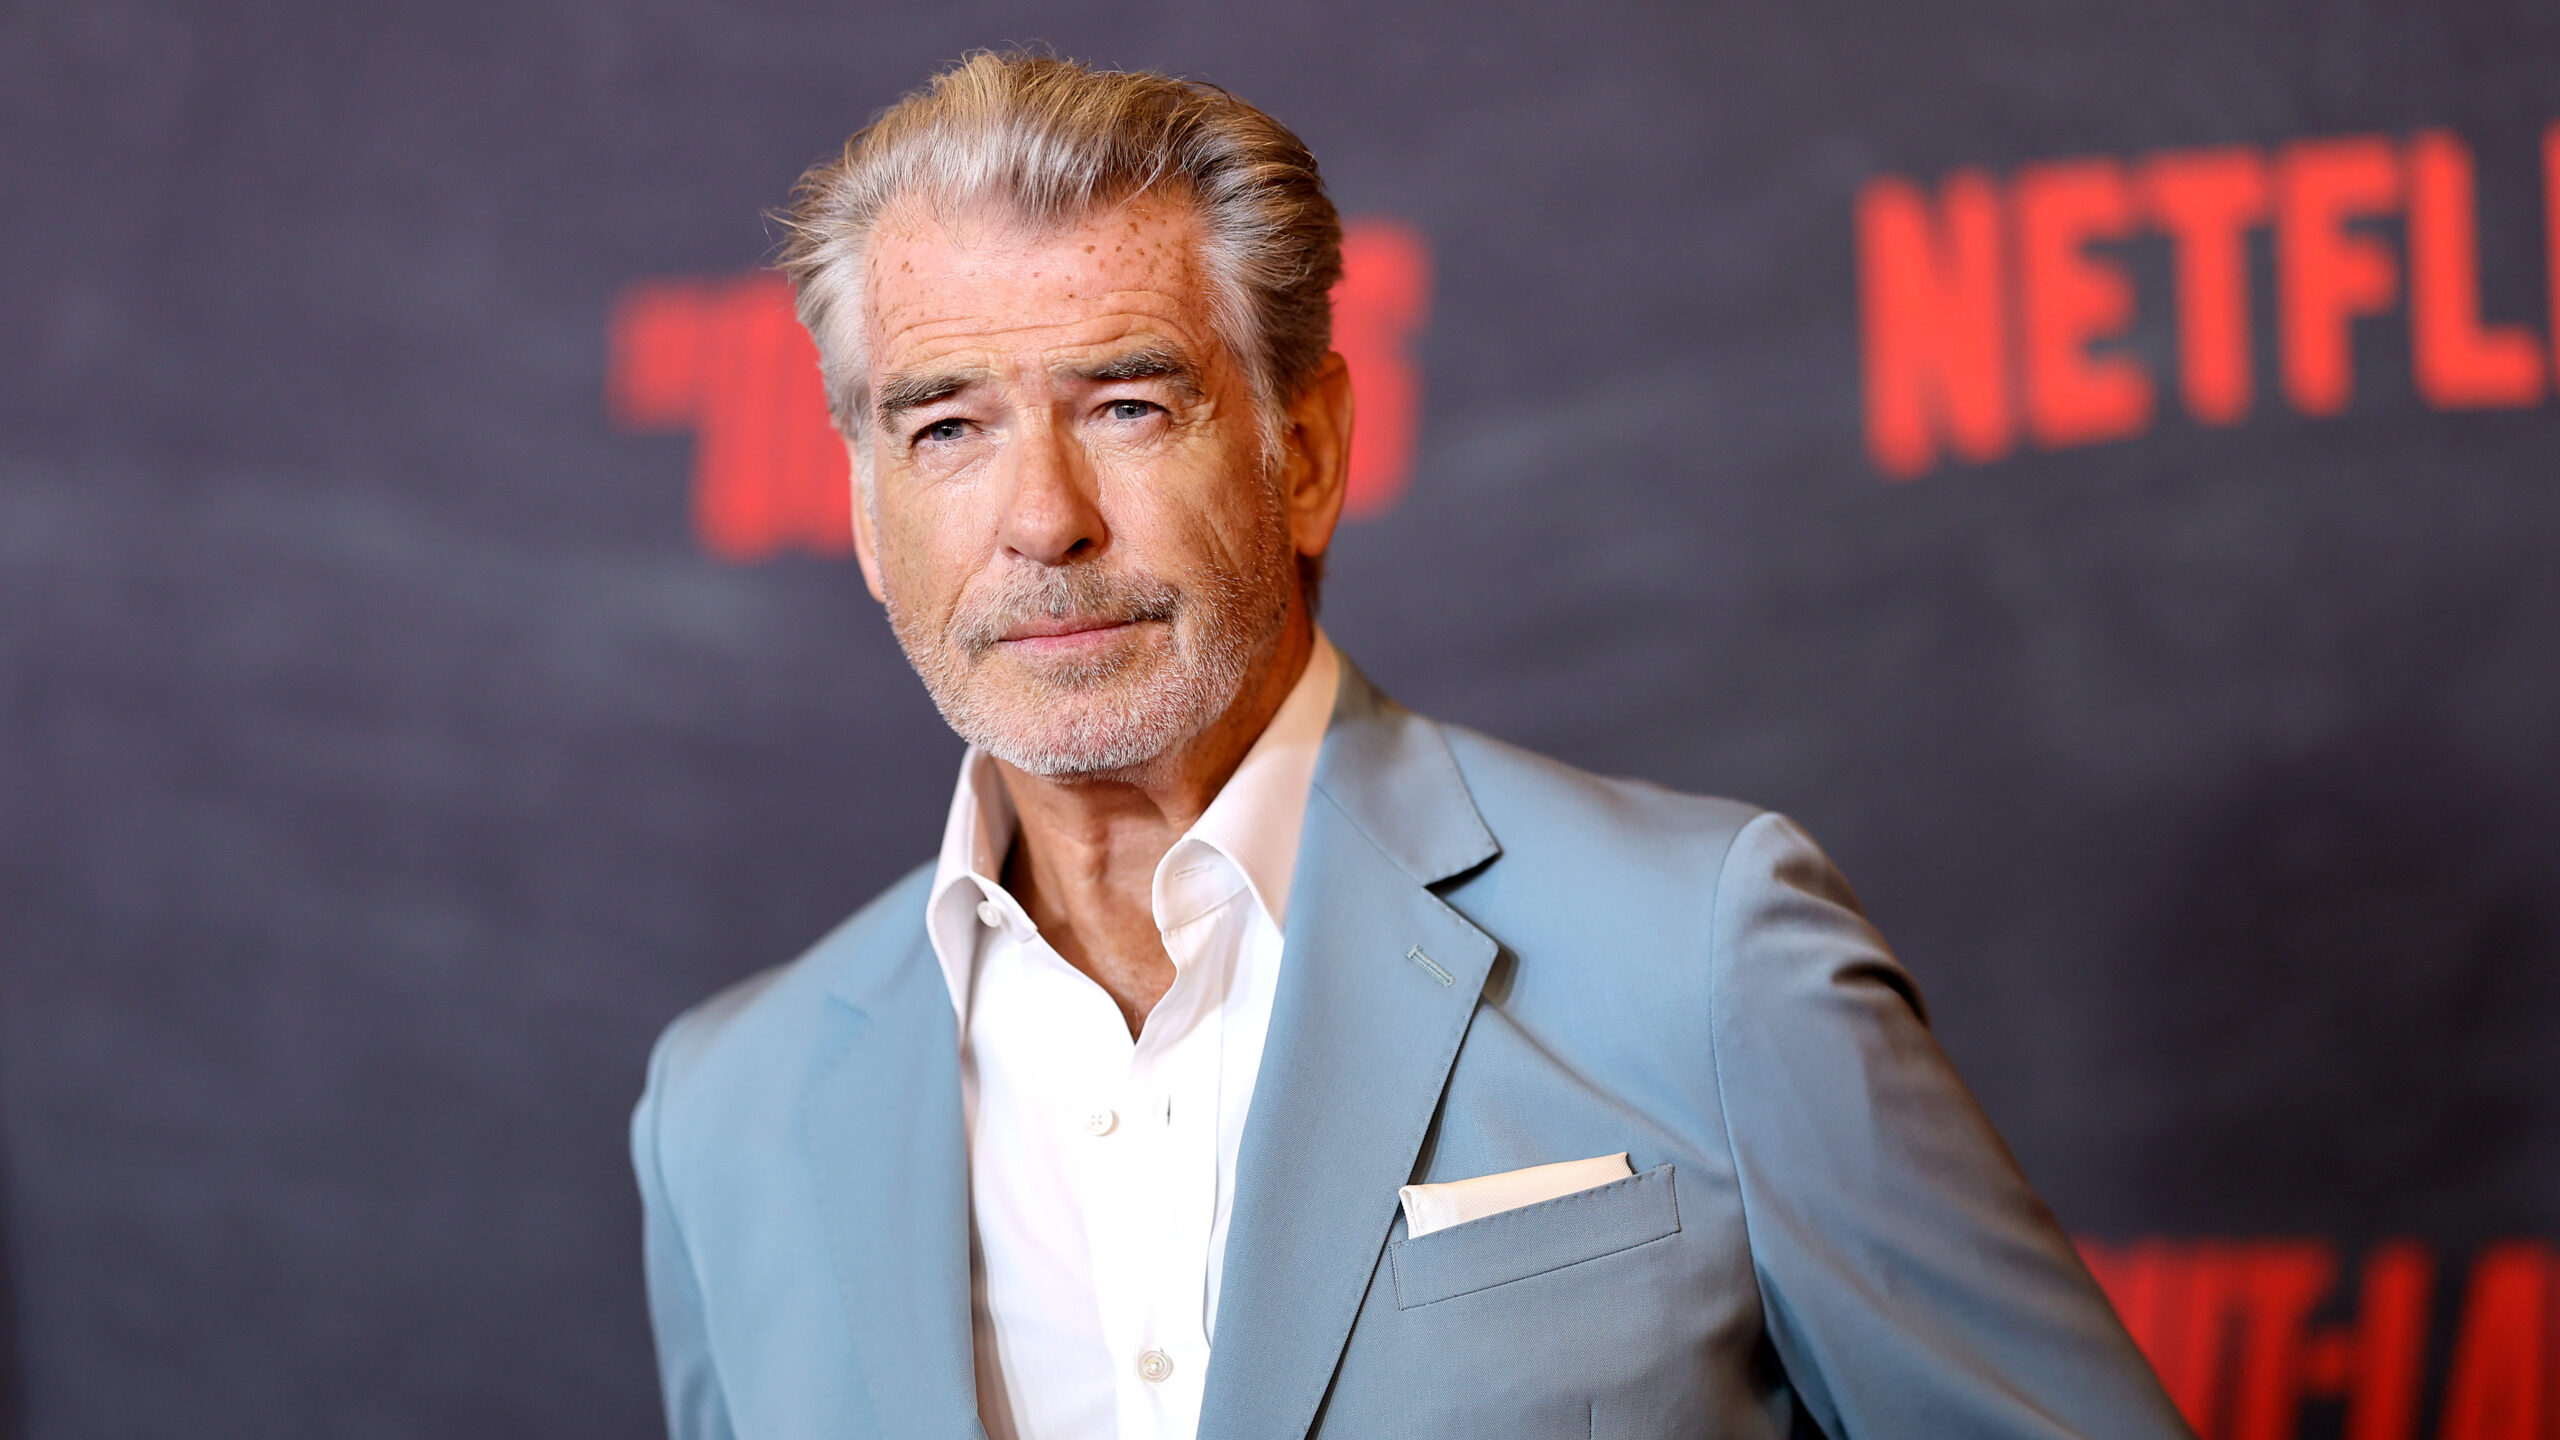 Pierce Brosnan faces charges after allegedly walking in Yellowstone’s thermal areas